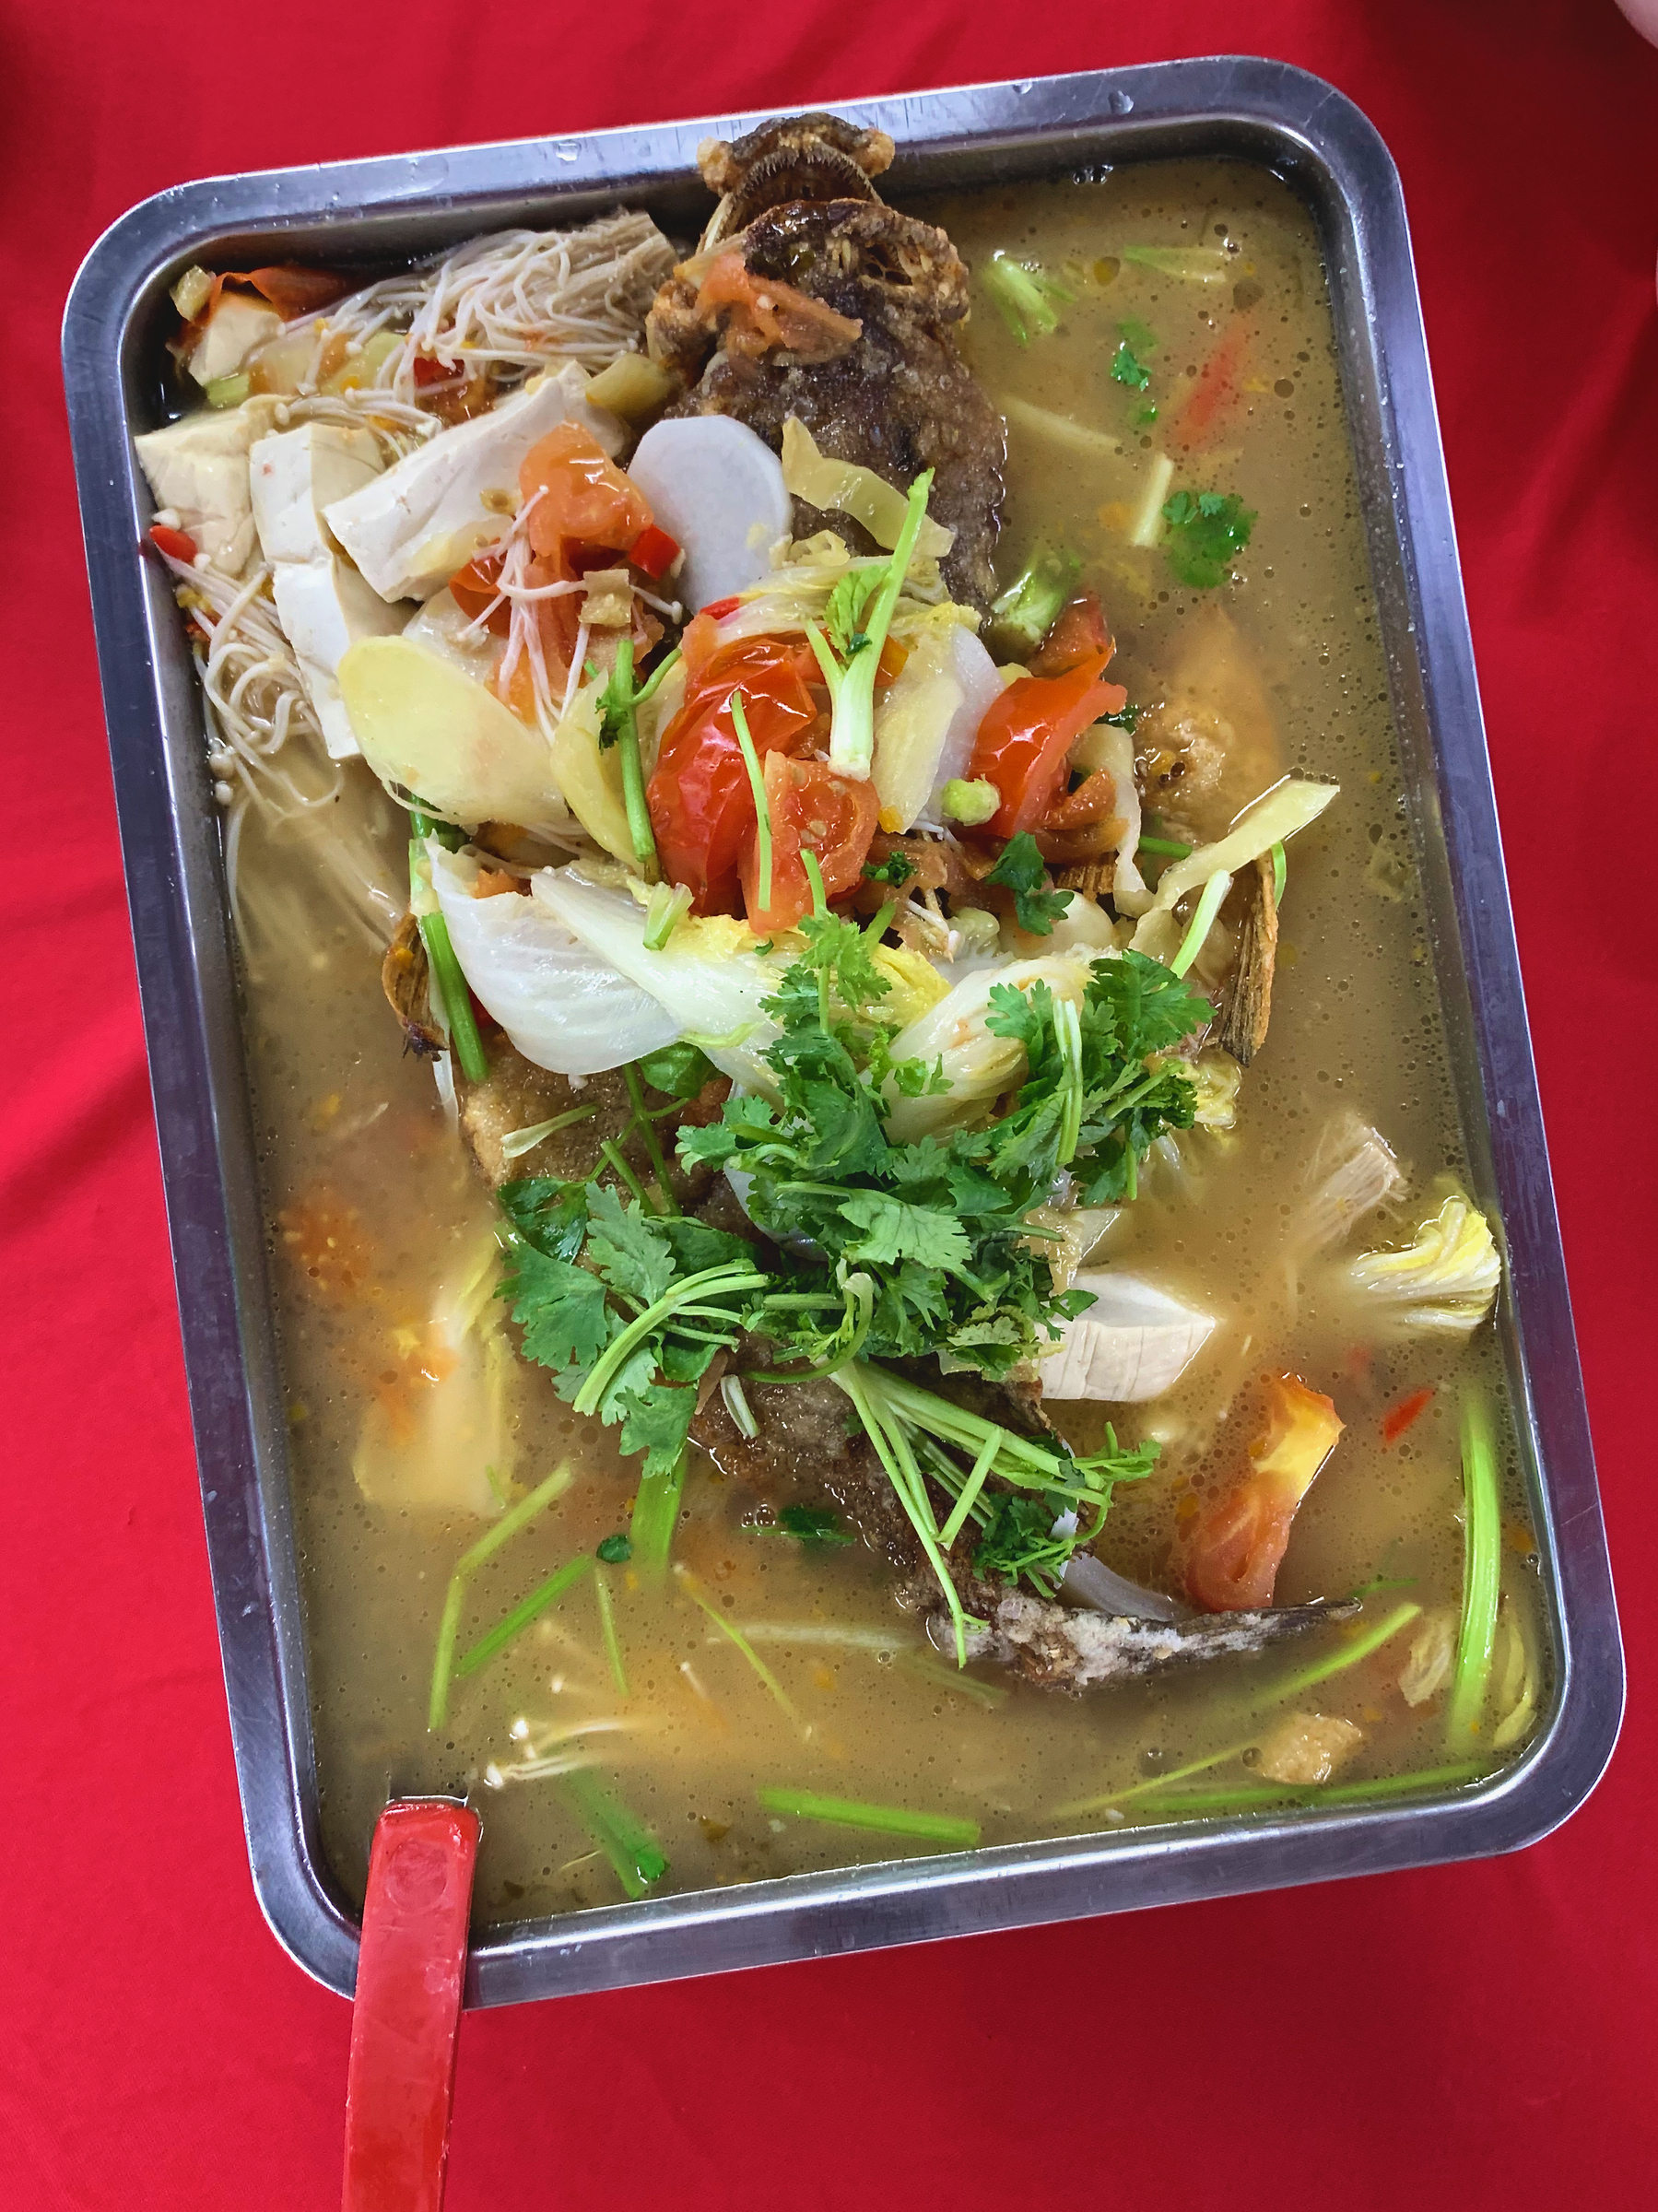 A chinese dish of whole fried fish in a broth